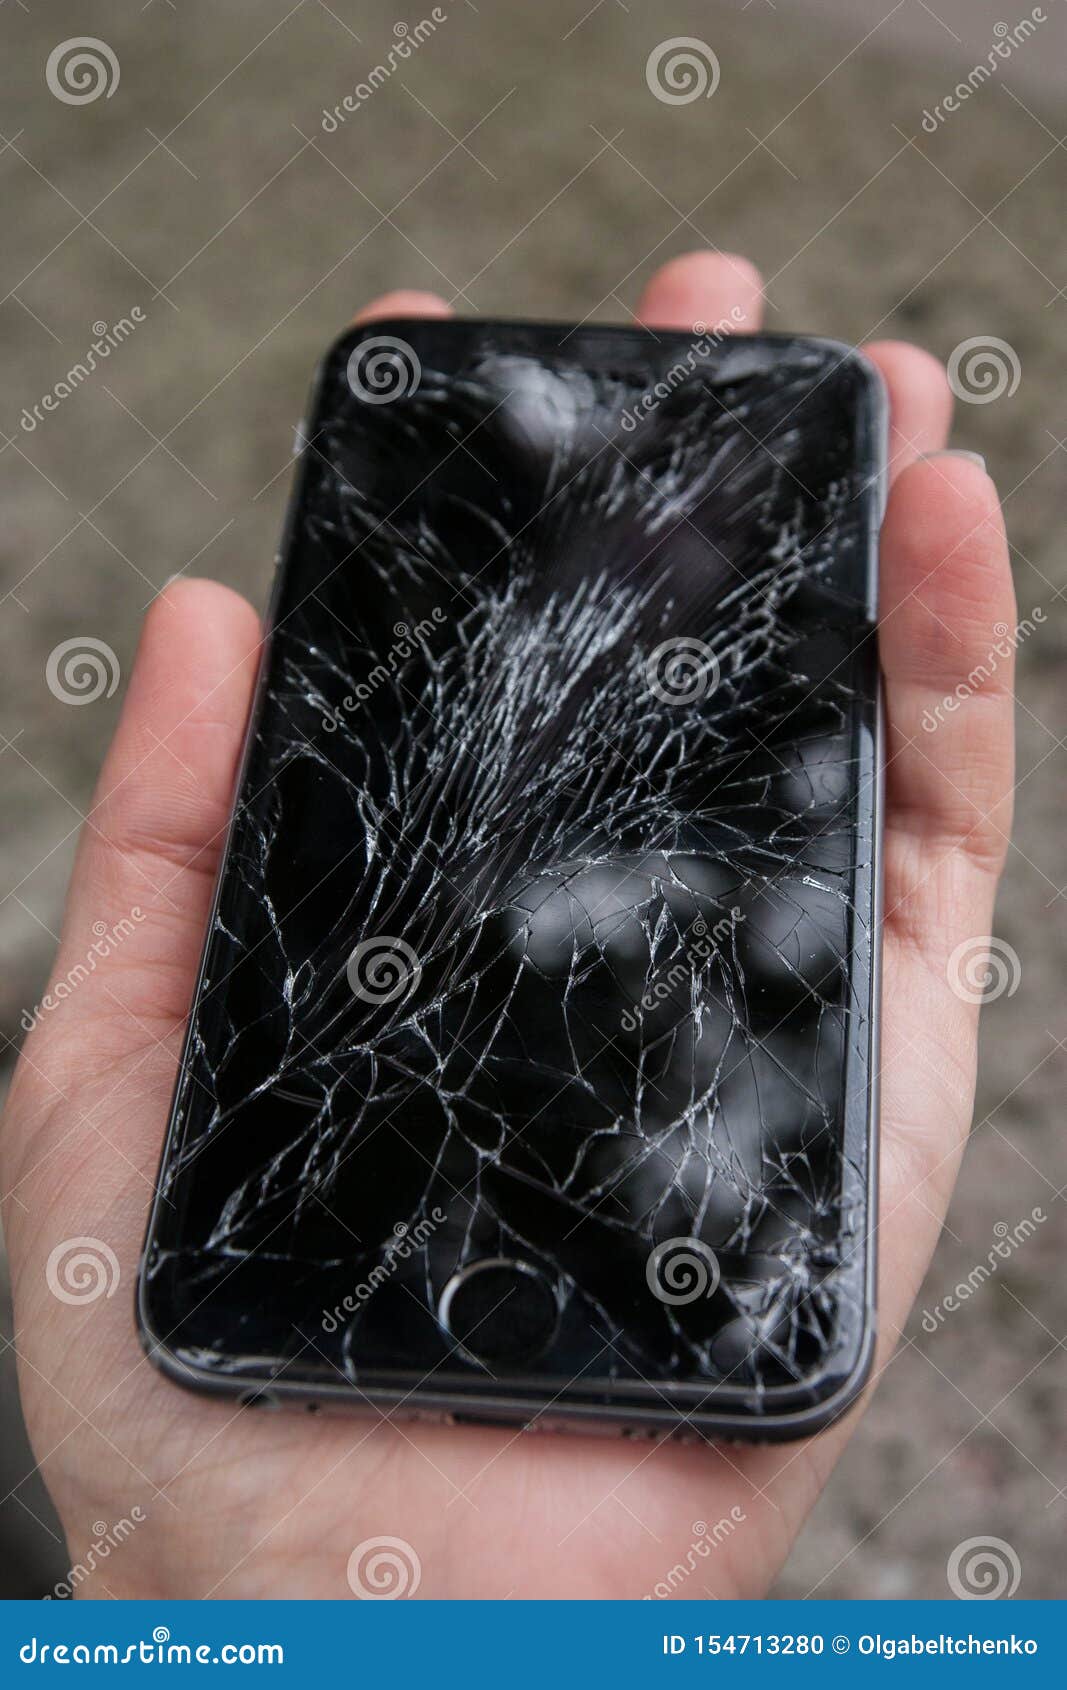 1 227 Broken Iphone Photos Free Royalty Free Stock Photos From Dreamstime